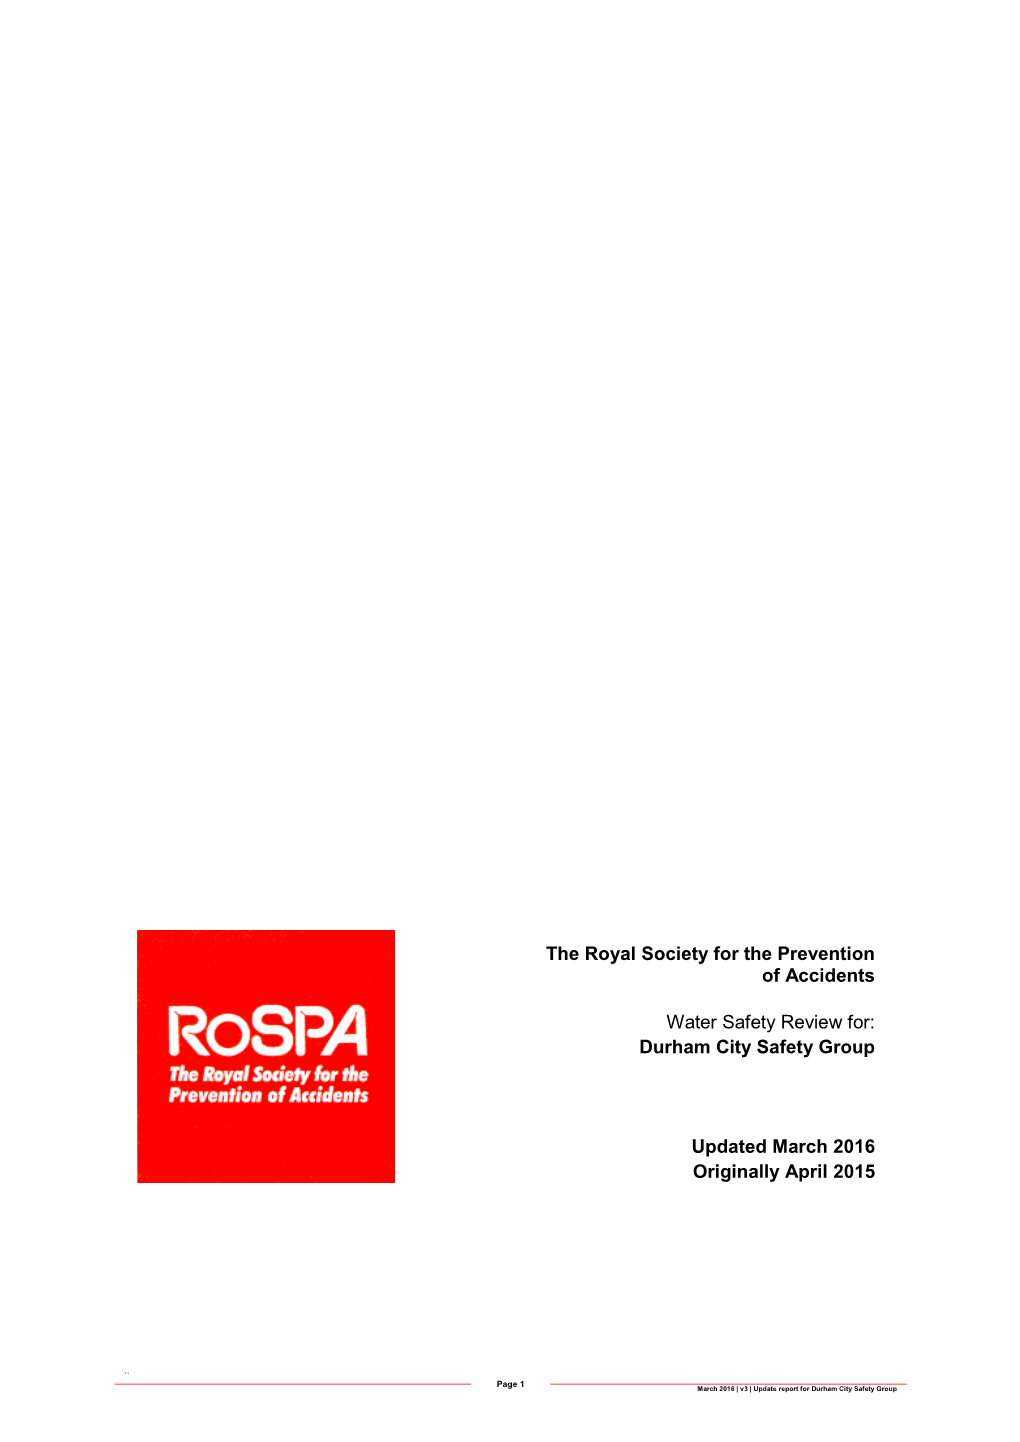 The Royal Society for the Prevention of Accidents Water Safety Review